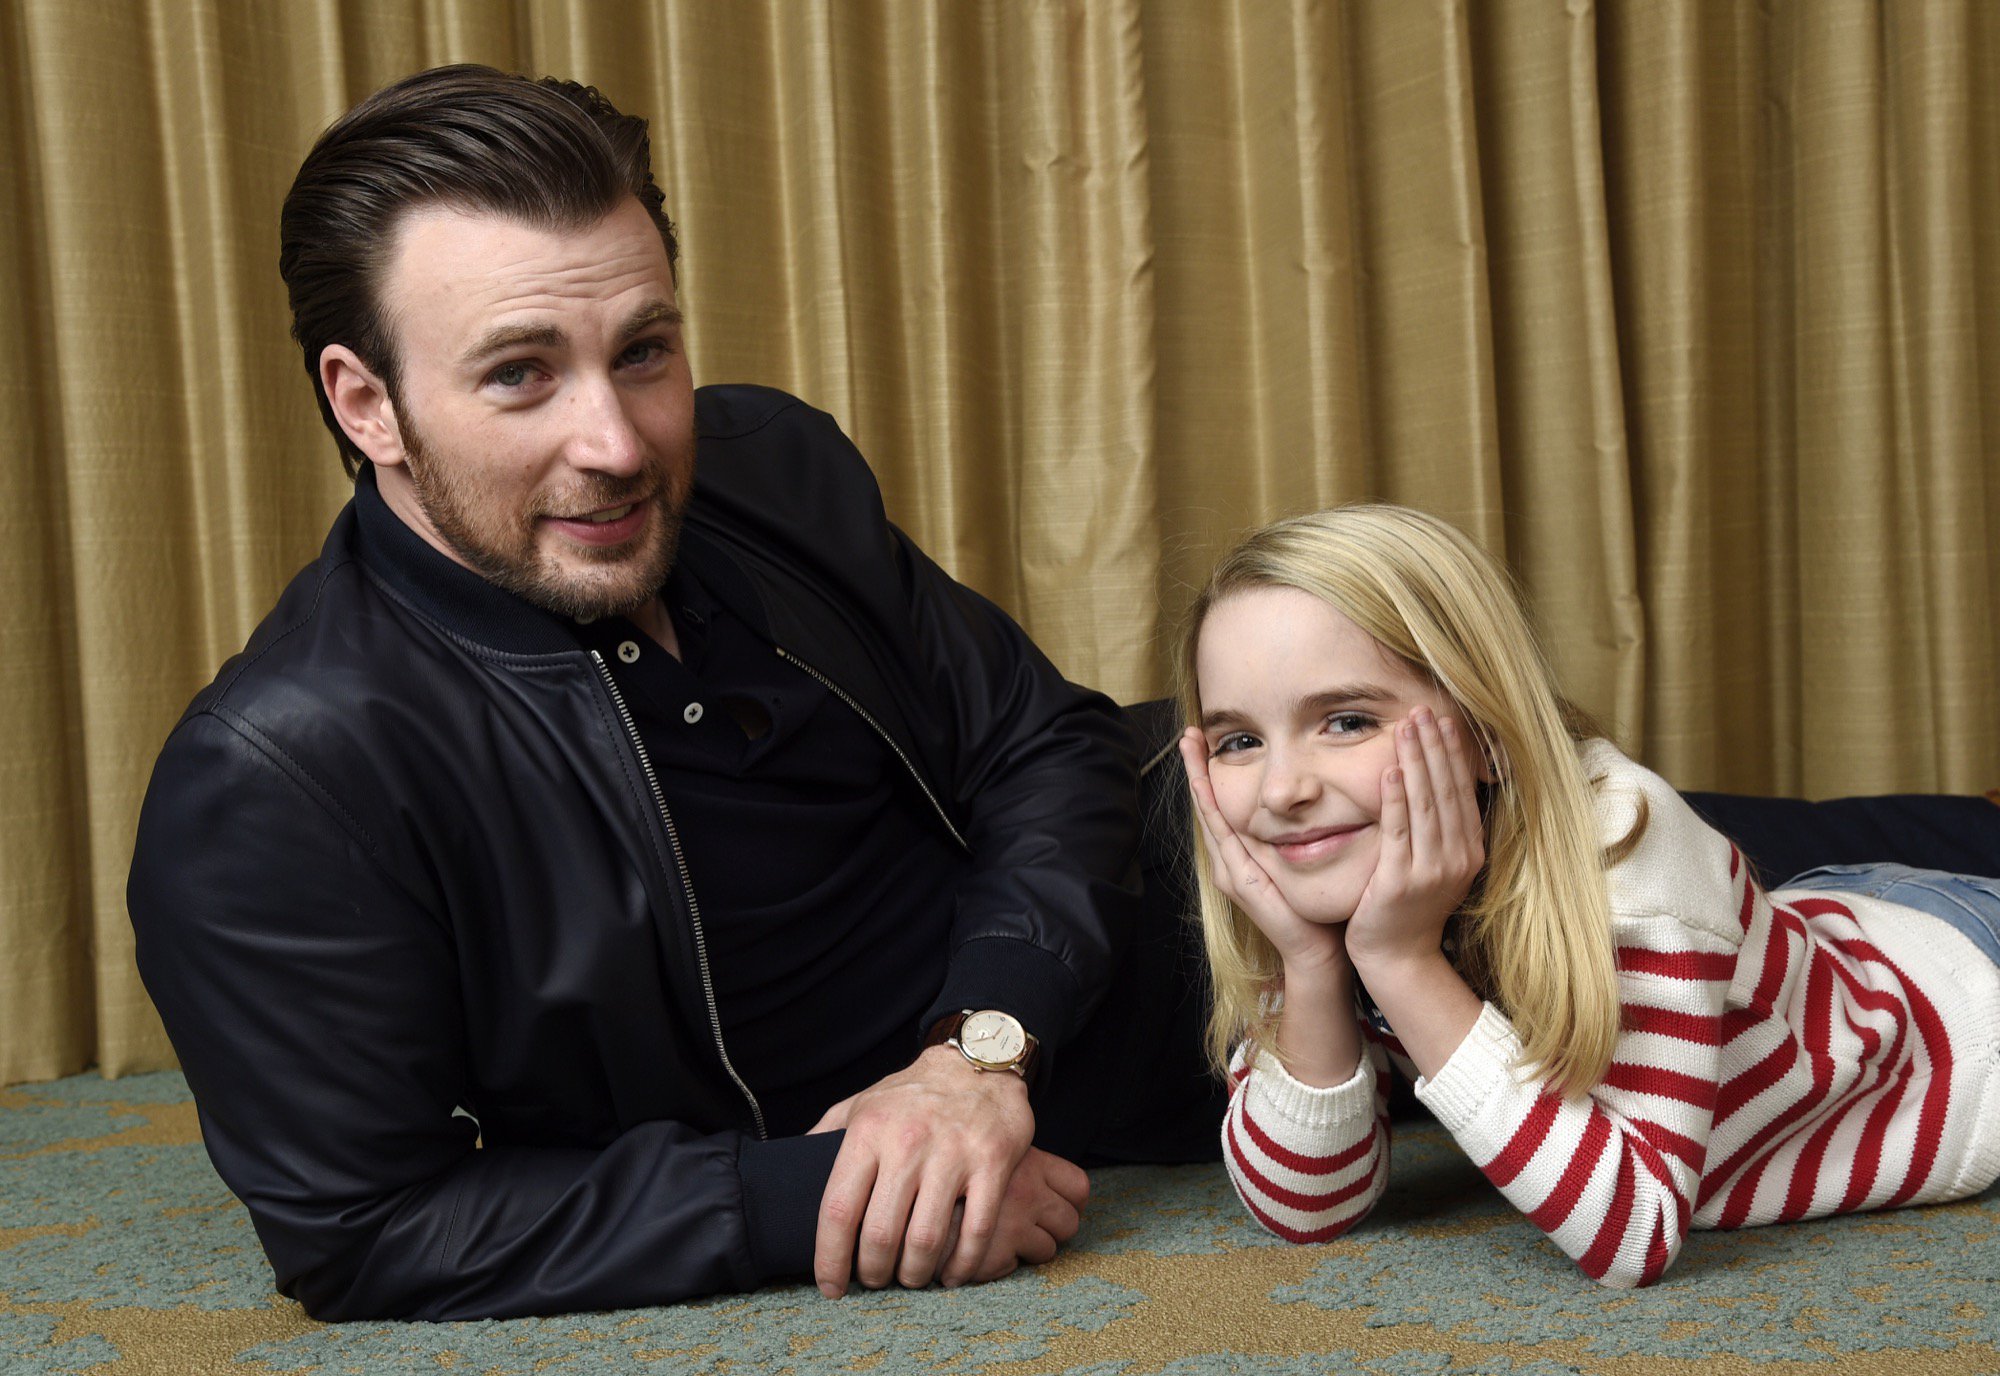 Twitter 上的Chris Evans News："Chris Evans and McKenna Grace photographed by  Chris Pizzello during Gifted press conference (April 2017) Credit:  https://t.co/wcaFbeWY37 https://t.co/mYGL5klMgl" / Twitter